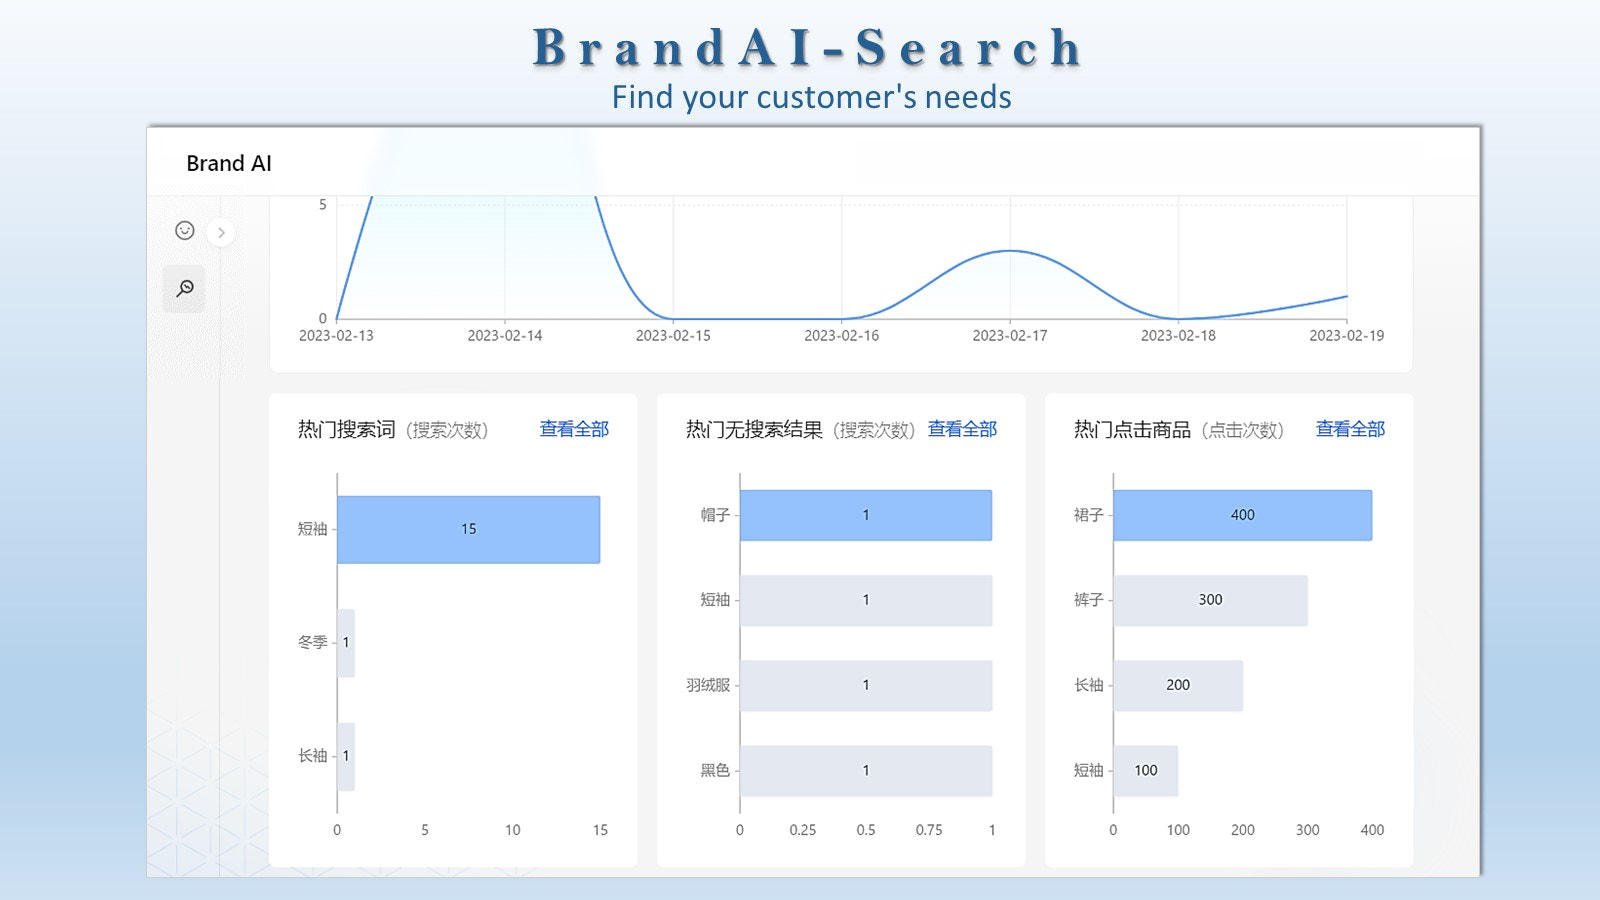 BrandAI-Search helps you find customer's needs